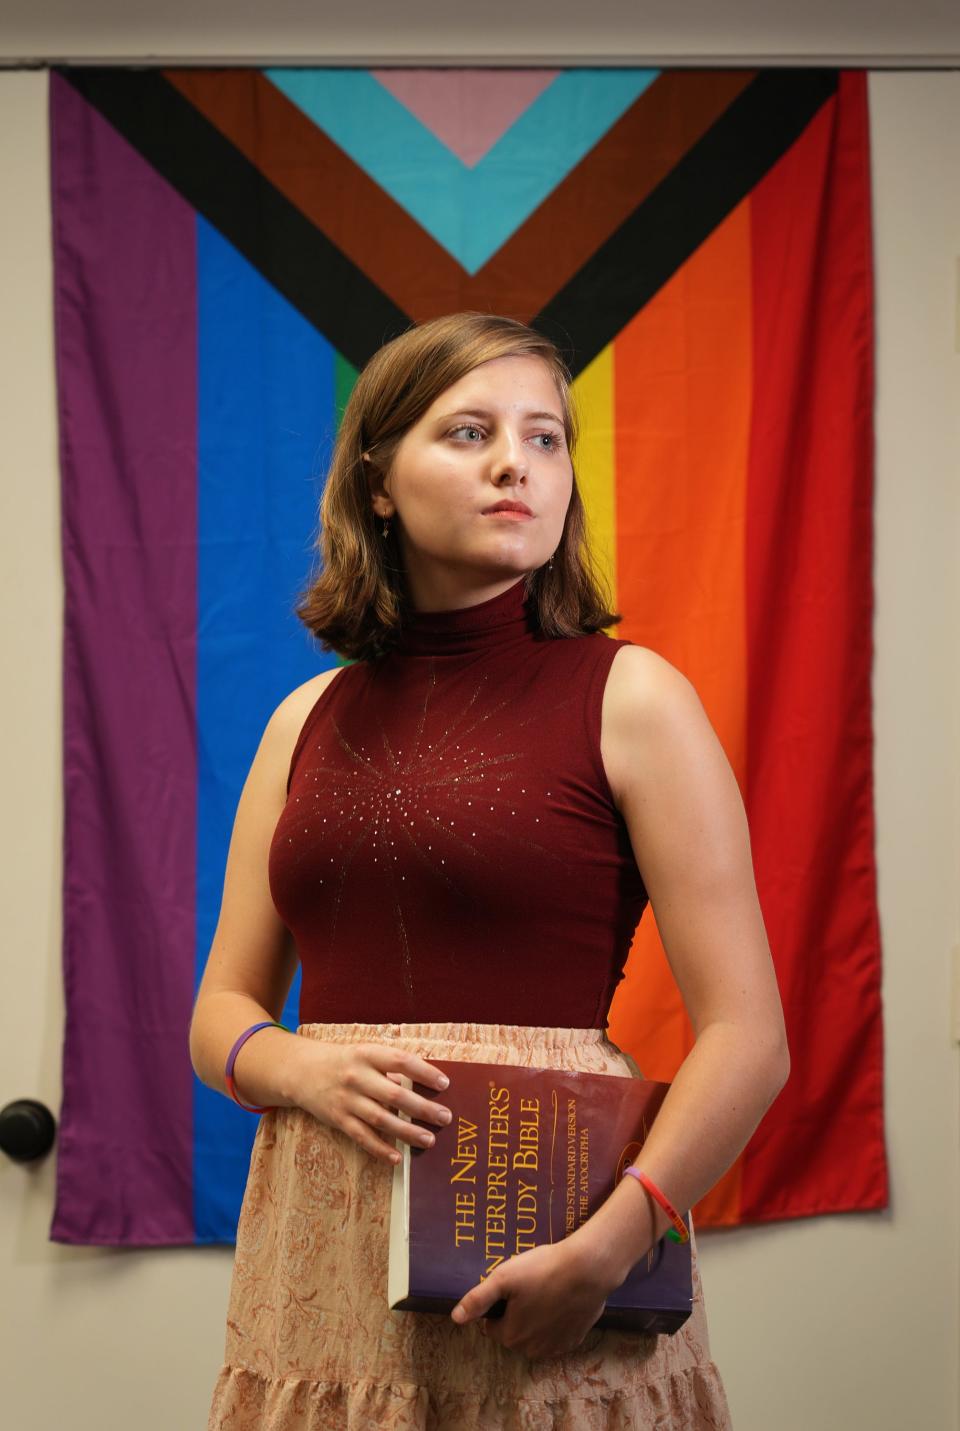 University of Texas student Alexa Morton sought out a more affirming congregation after realizing that her faith and sexuality were at odds. She found it at the Labyrinth Progressive Student Ministry.